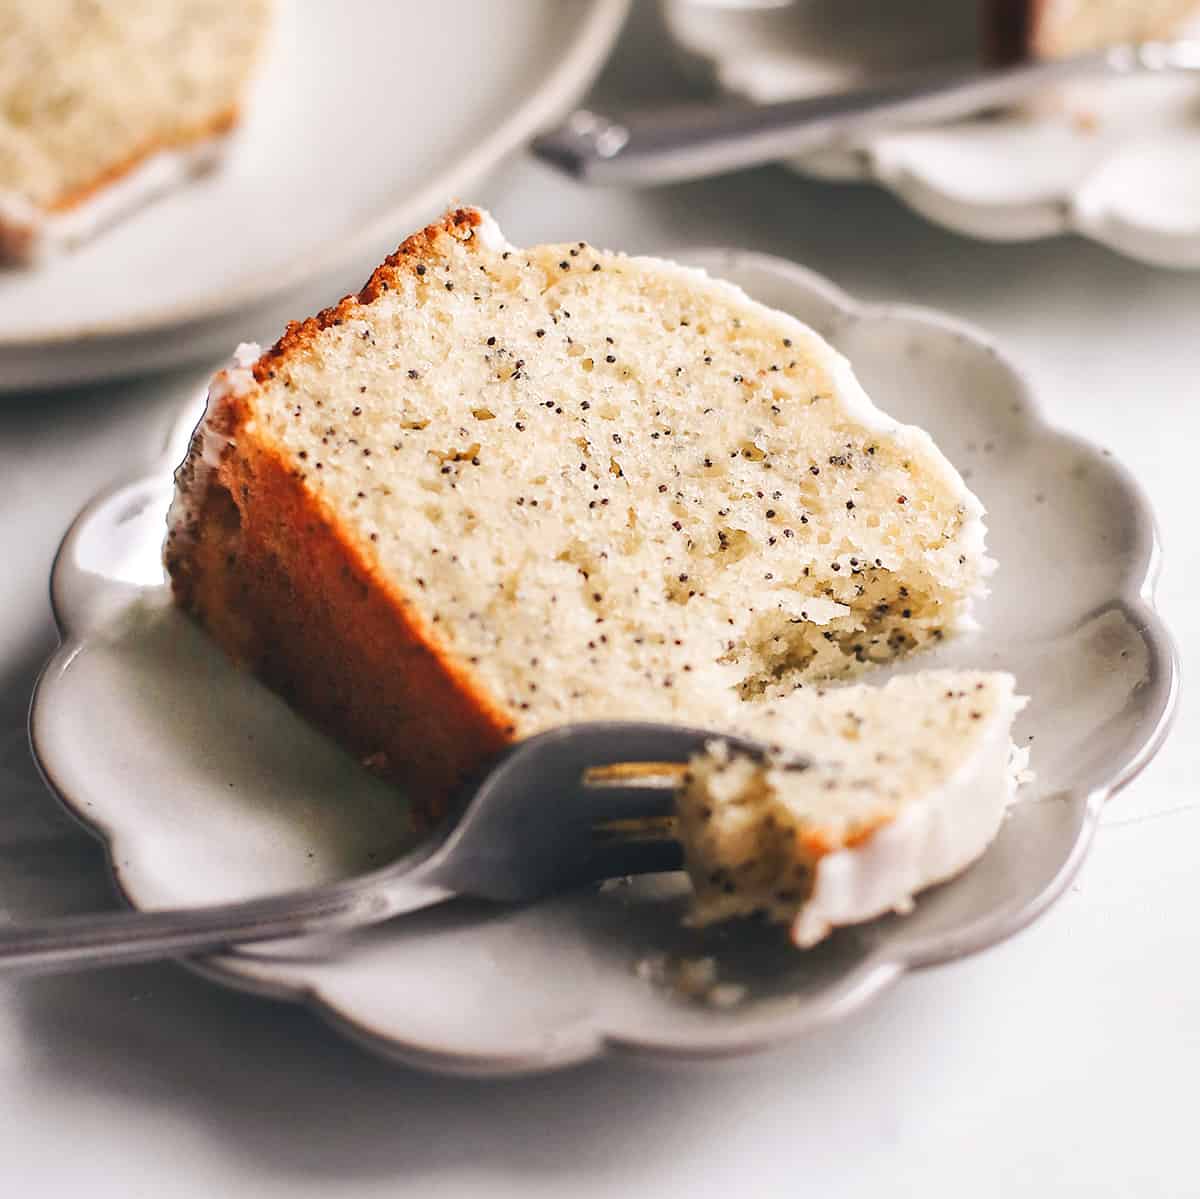 a fork taking a bite of a piece of Poppy Seed Cake on a plate